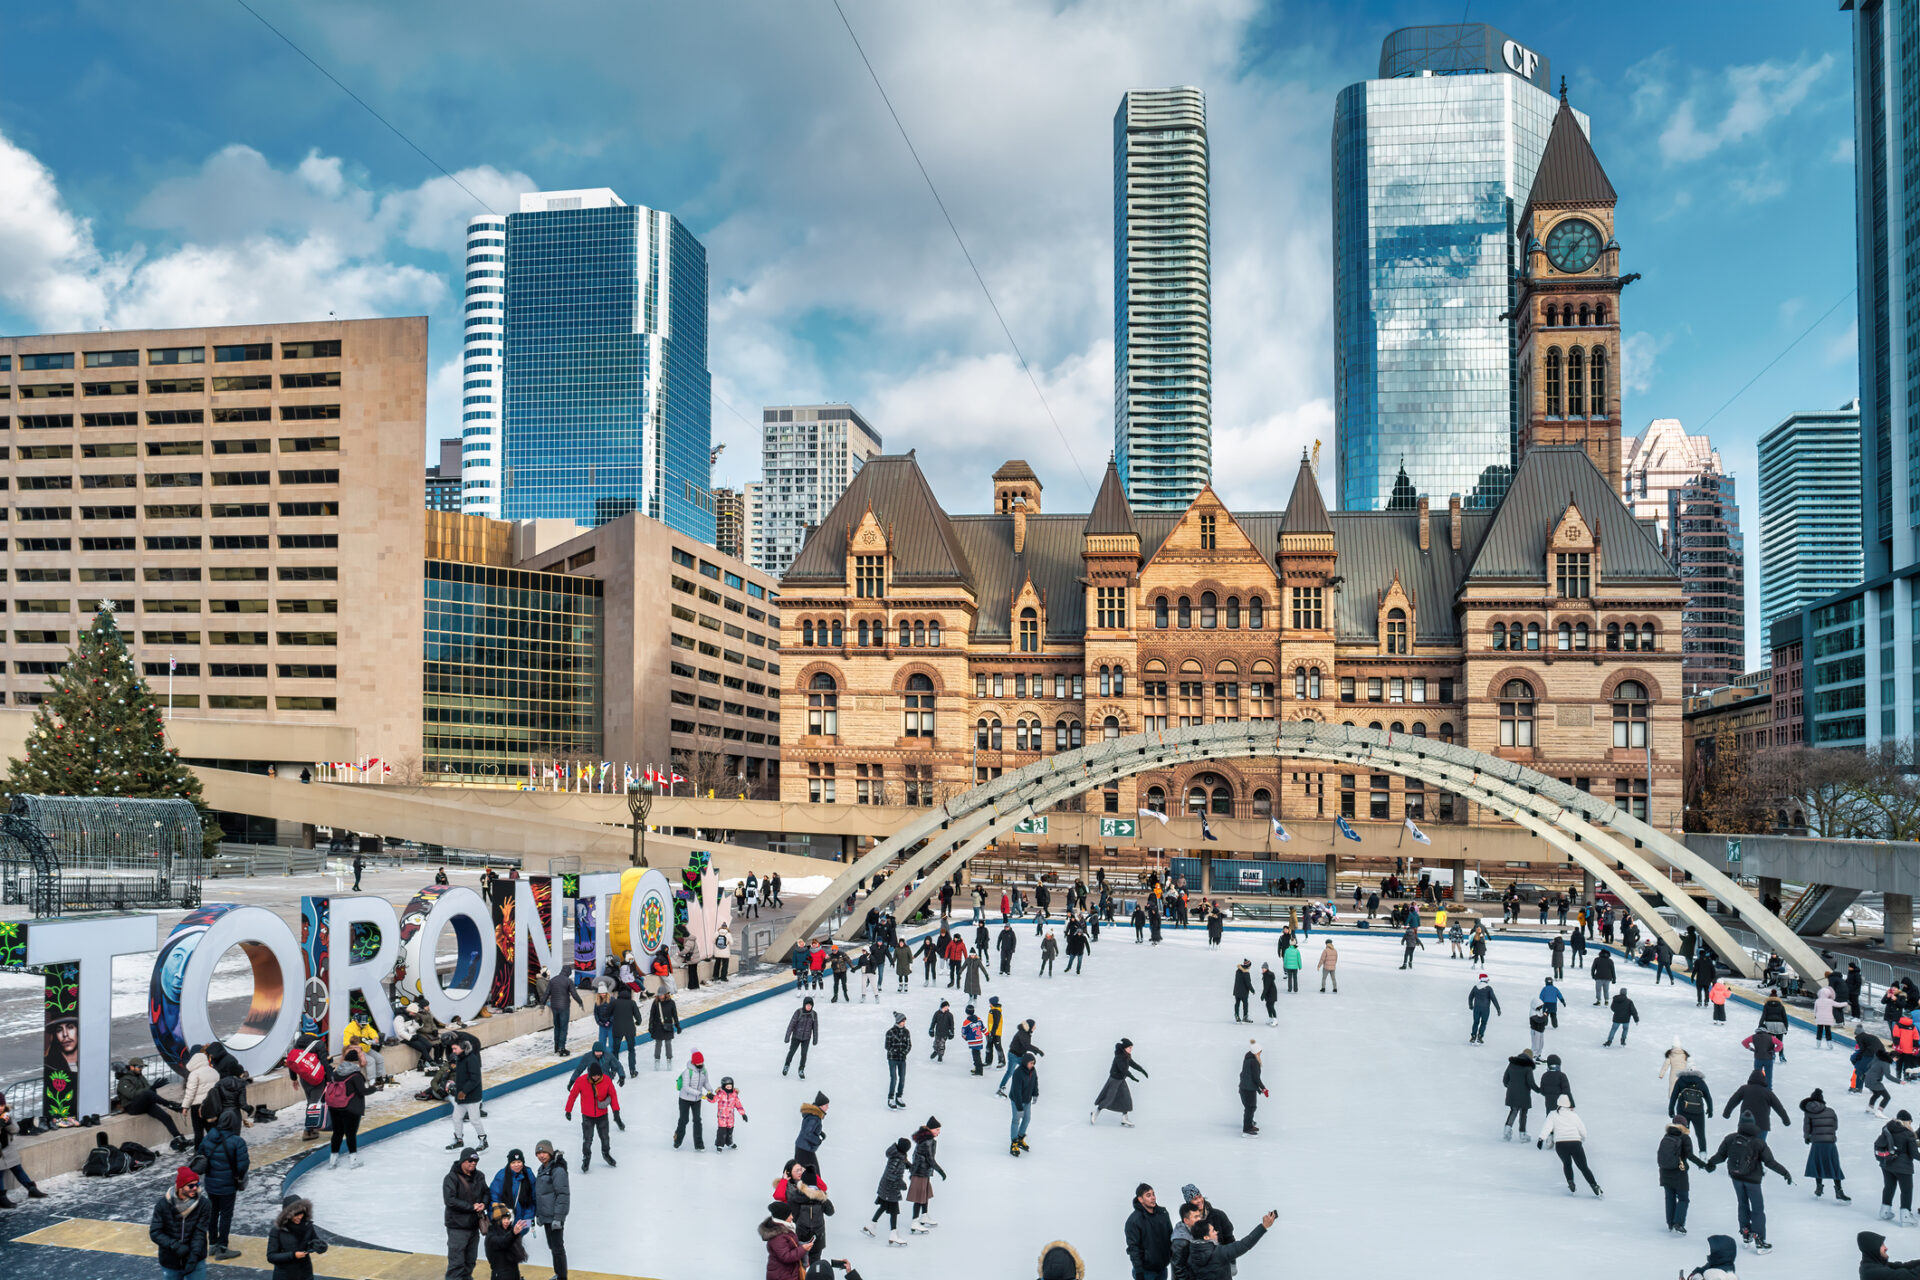 Here’s how to save on your trip to Toronto this winter